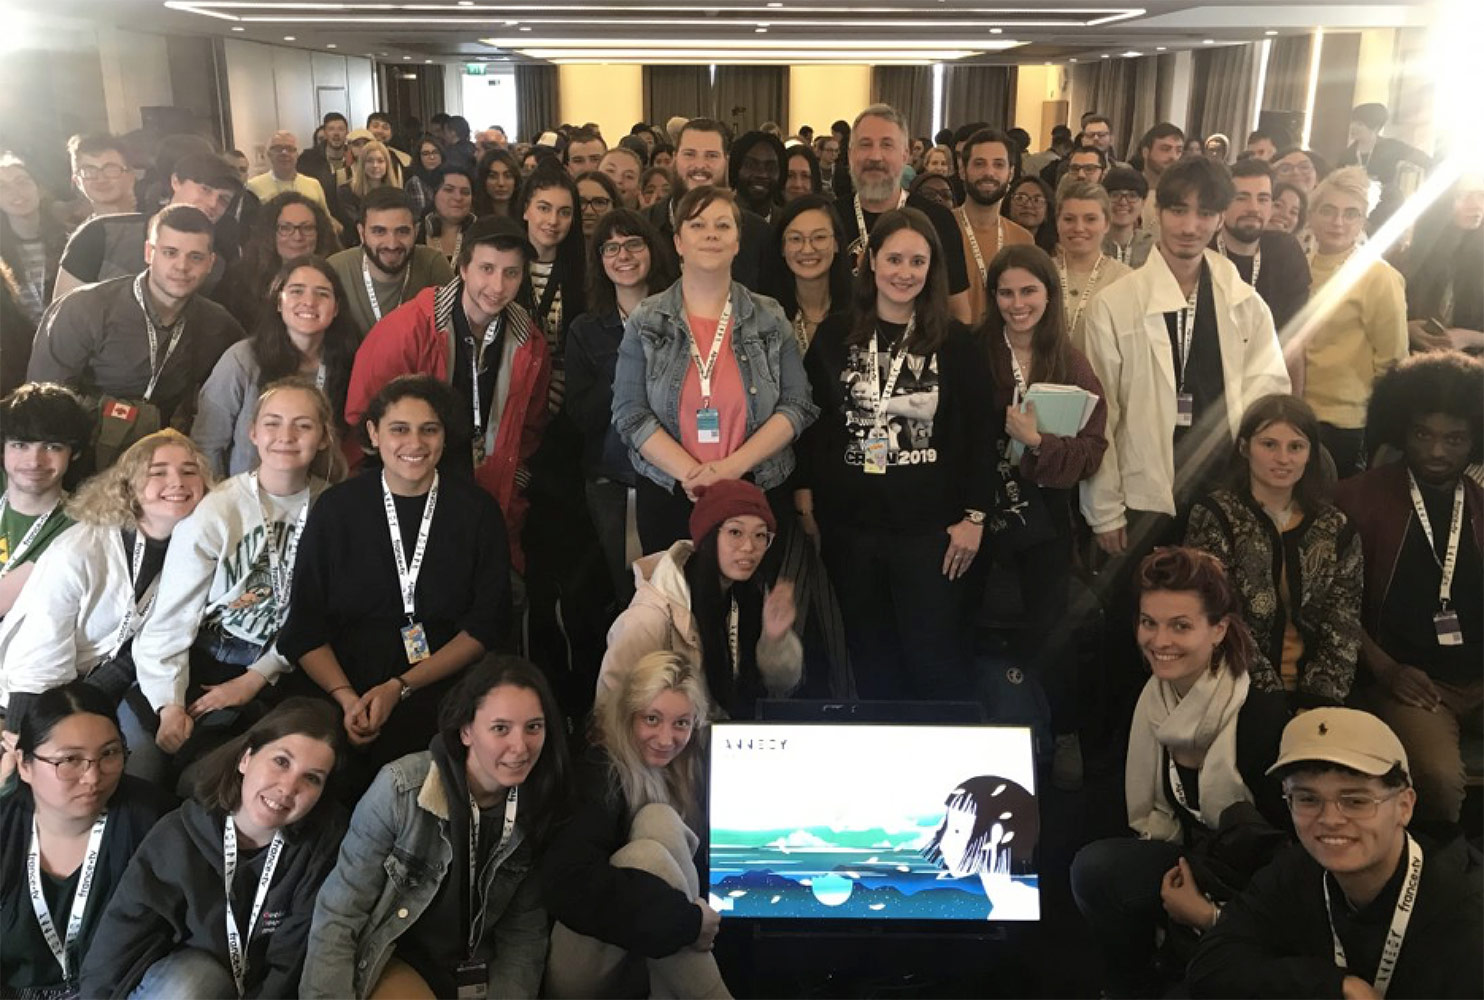 A photo of the attendees at the 2019 Annecy International Animation Film Festival's Master Your Career in Animation/VFX panel, which drew students from all over the world. Photo by Angelica Vergel.